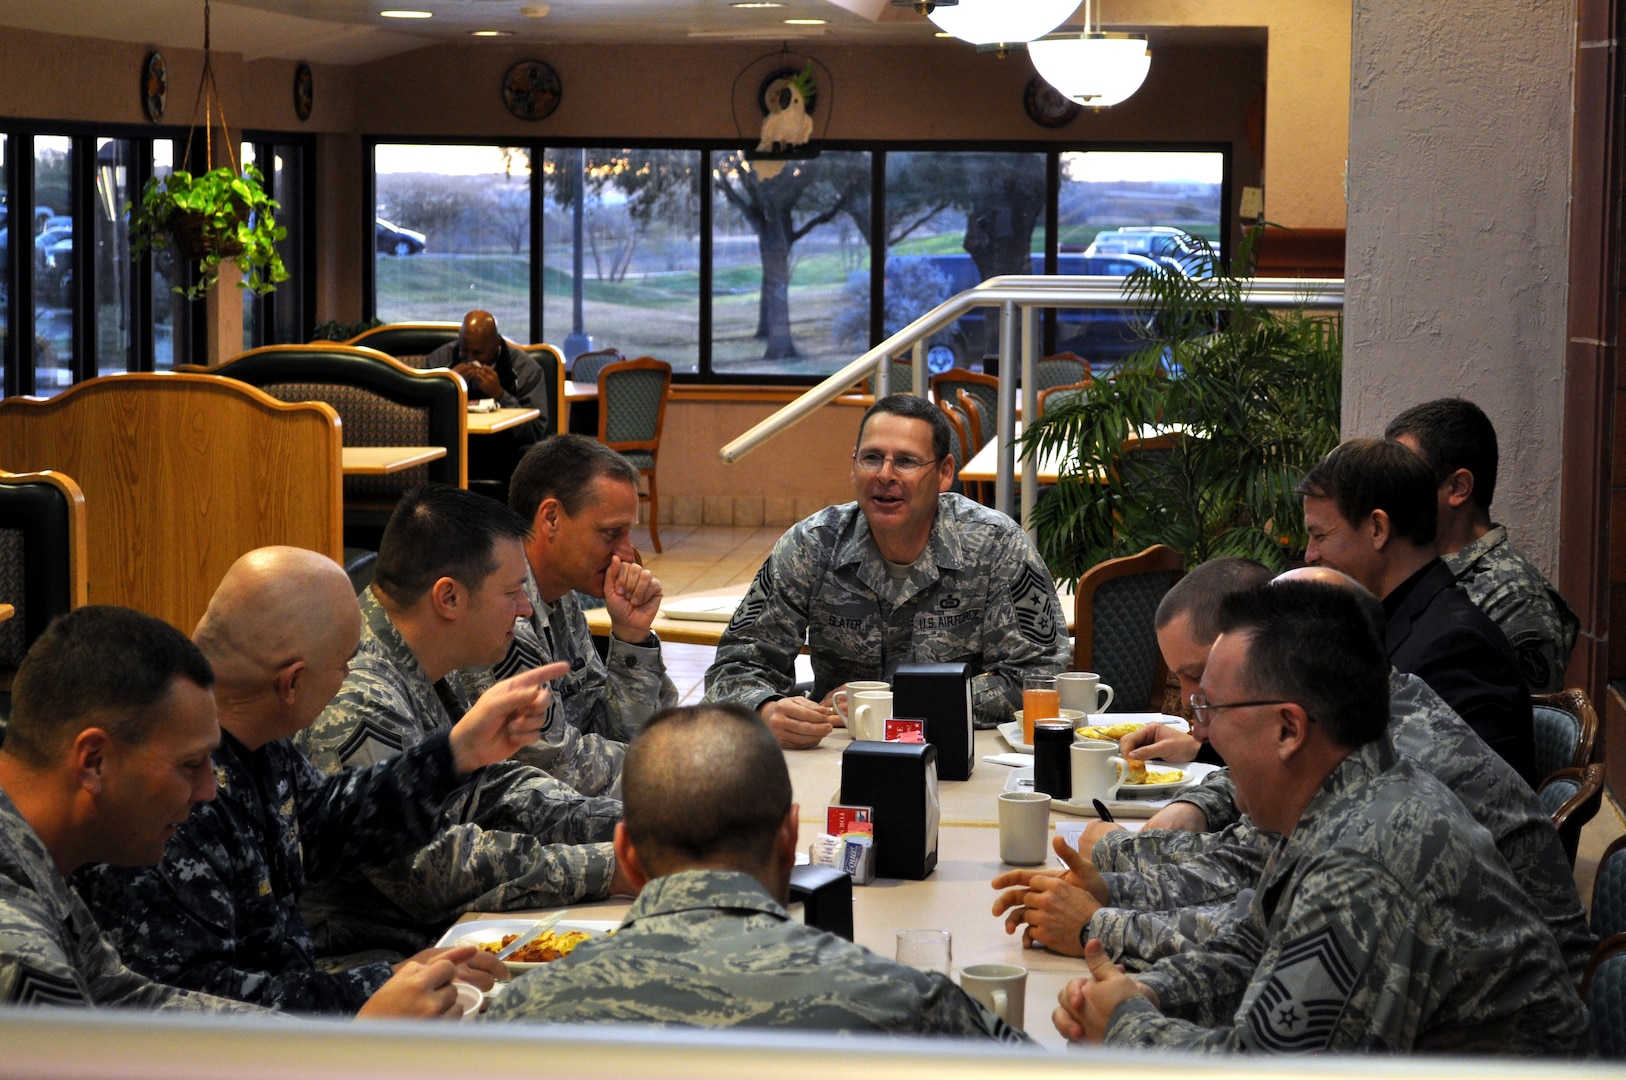 LACKLAND AIR FORCE BASE, Texas -- Command Master Chief Daniel Miller, senior enlisted leader for U.S. Cyber Command, National Security Agency and Central Security Service, speaks to fellow E-9s during a "Chief’s Call" at Gott Dining Facility here Jan. 12. Miller visited 24th Air Force and subordinate units of Air Forces Cyber during his 24th AF and AFCYBER update, to include recognition of some of the unit members for their outstanding work. The enlisted leaders exchanged views on trends in military culture, supervisory needs and ways of improving established programs during the Chief’s Call. (U.S. Air Force photo by William Parks)